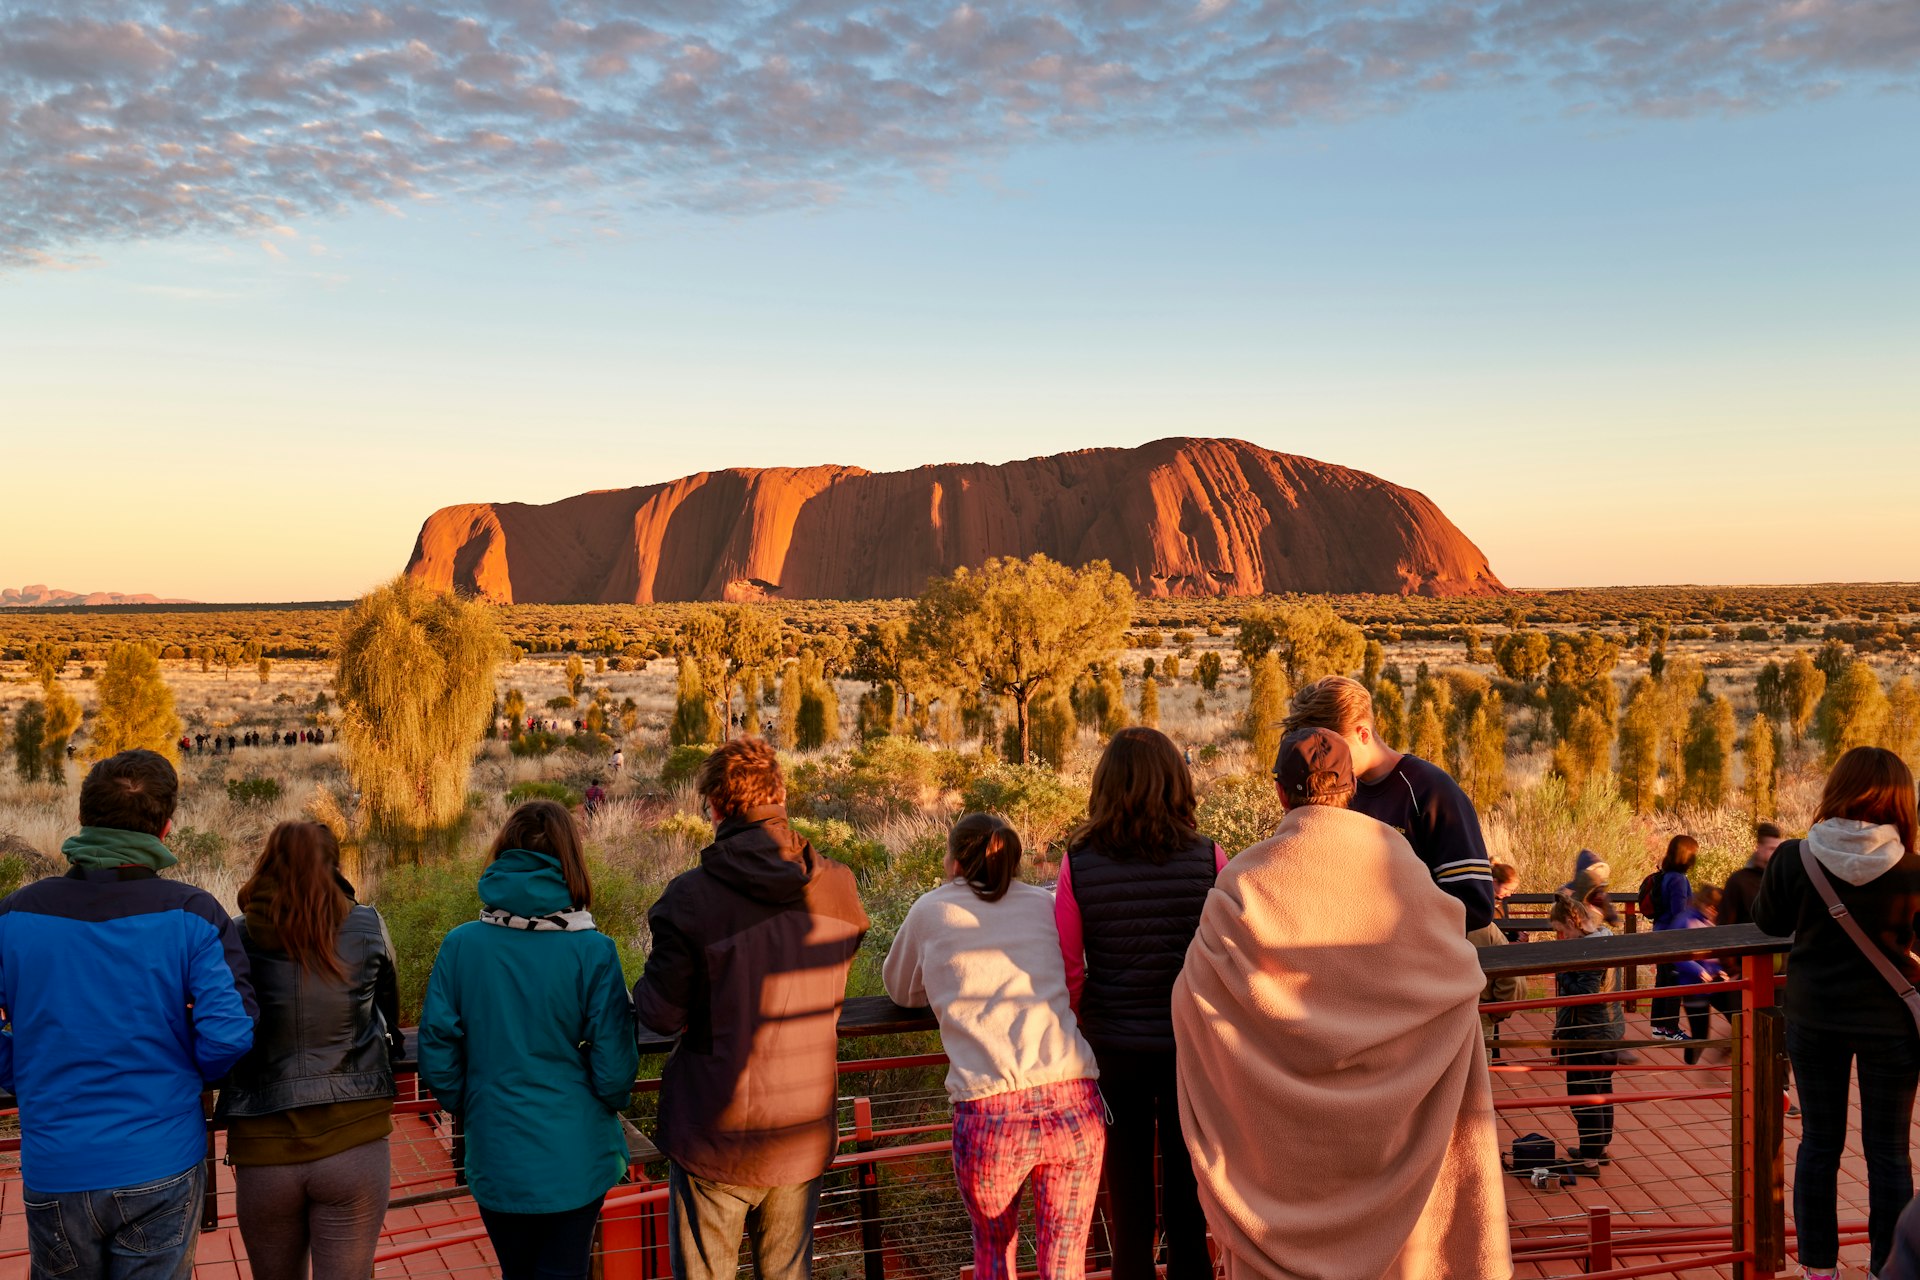 Crowds look at Uluru at dusk, Red Centre, Northern Territory, Australia